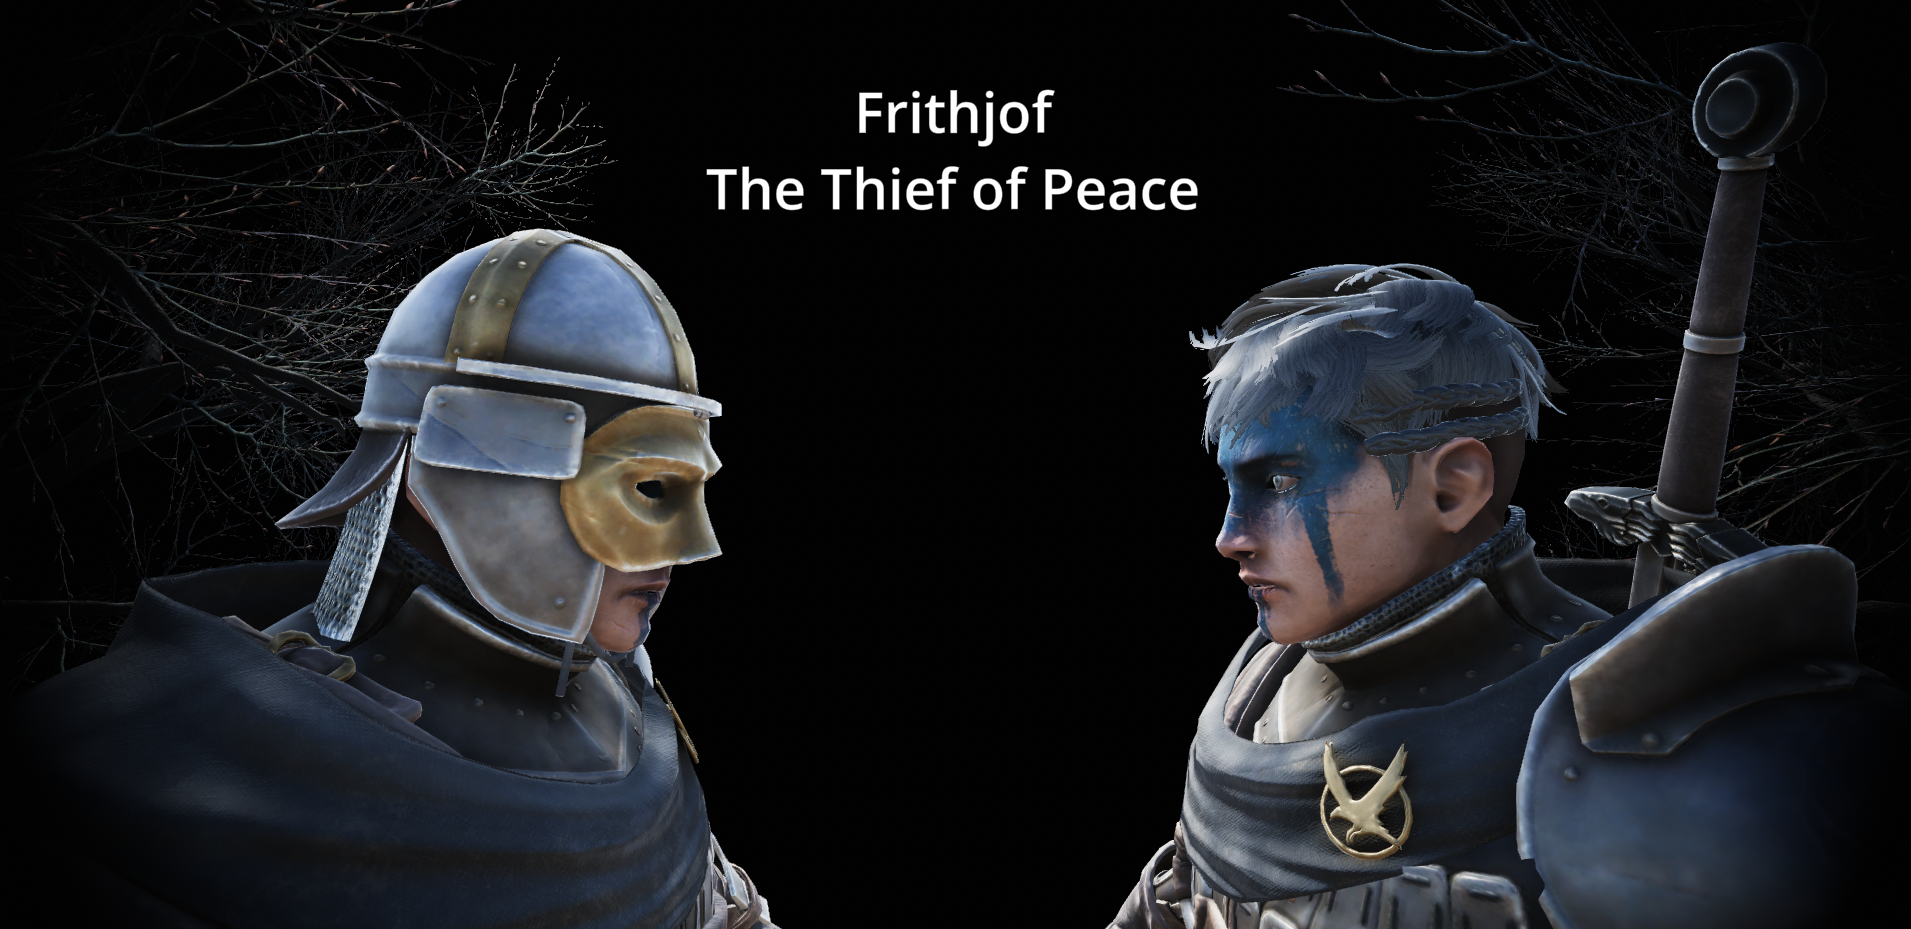 Frithjof : The Thief of Peace